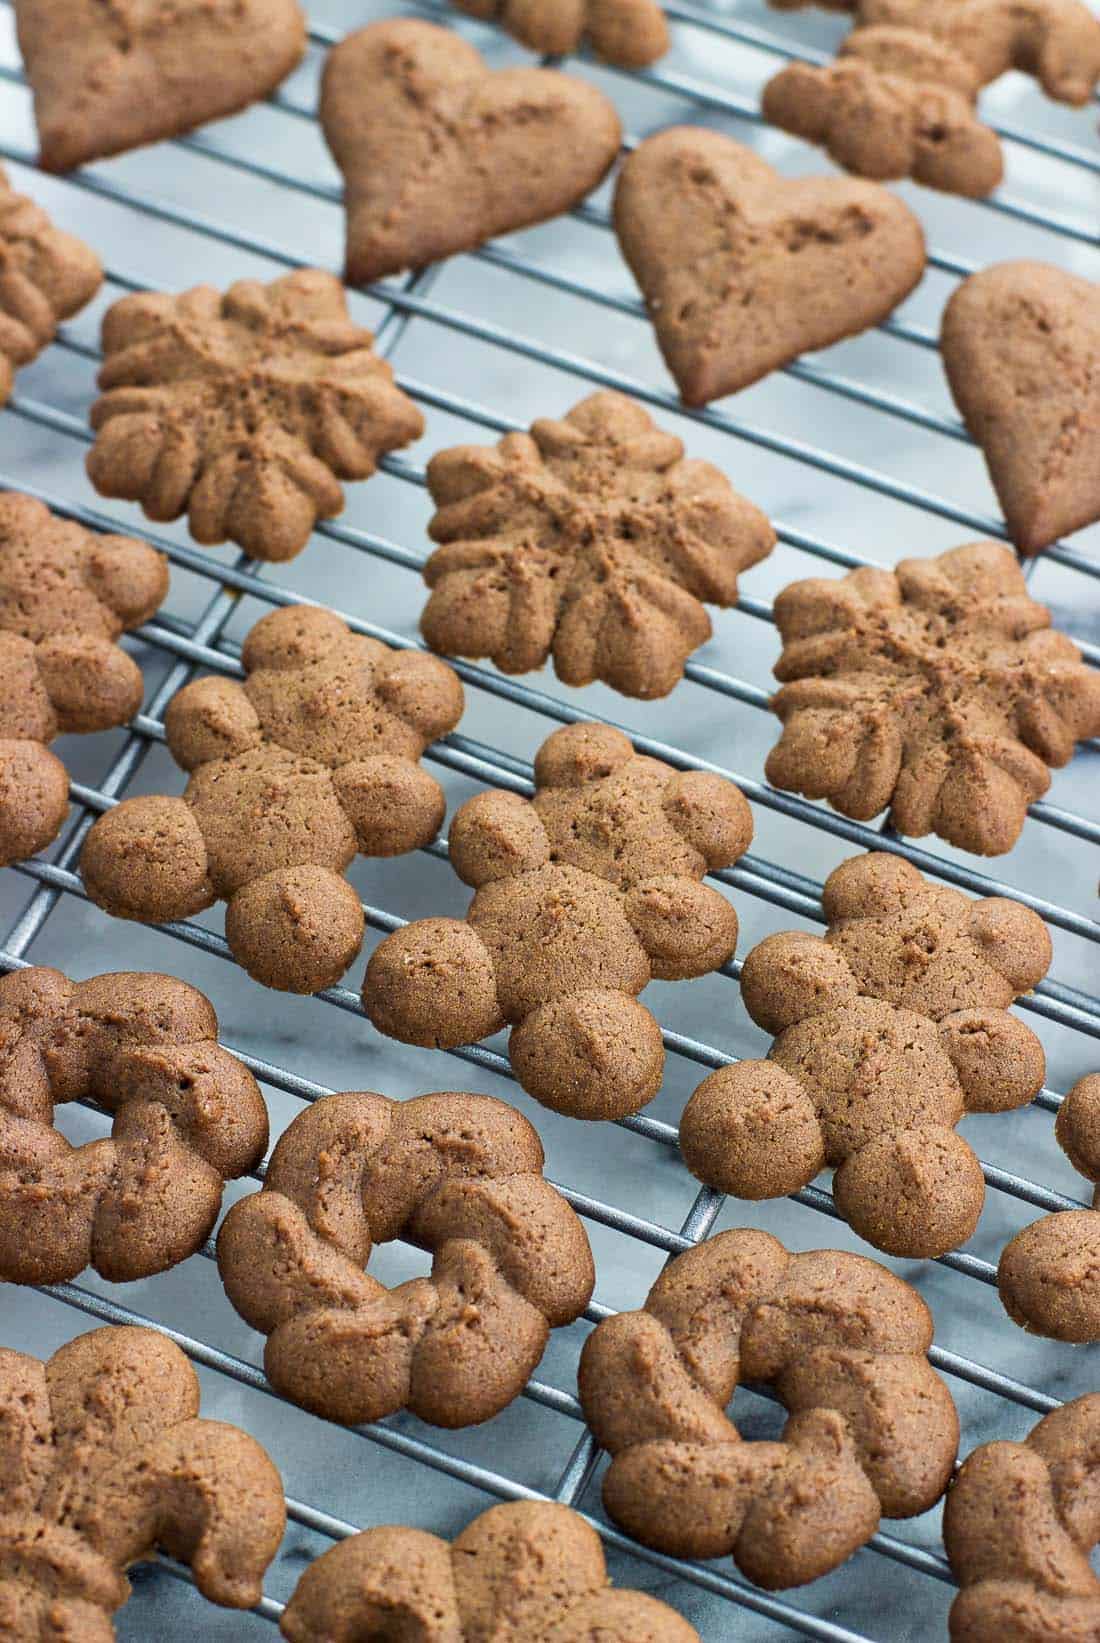 A close-up view of an assortment of shaped cookies on a rack, including a teddy bear shape, a wreath, a snowflake, and a heart